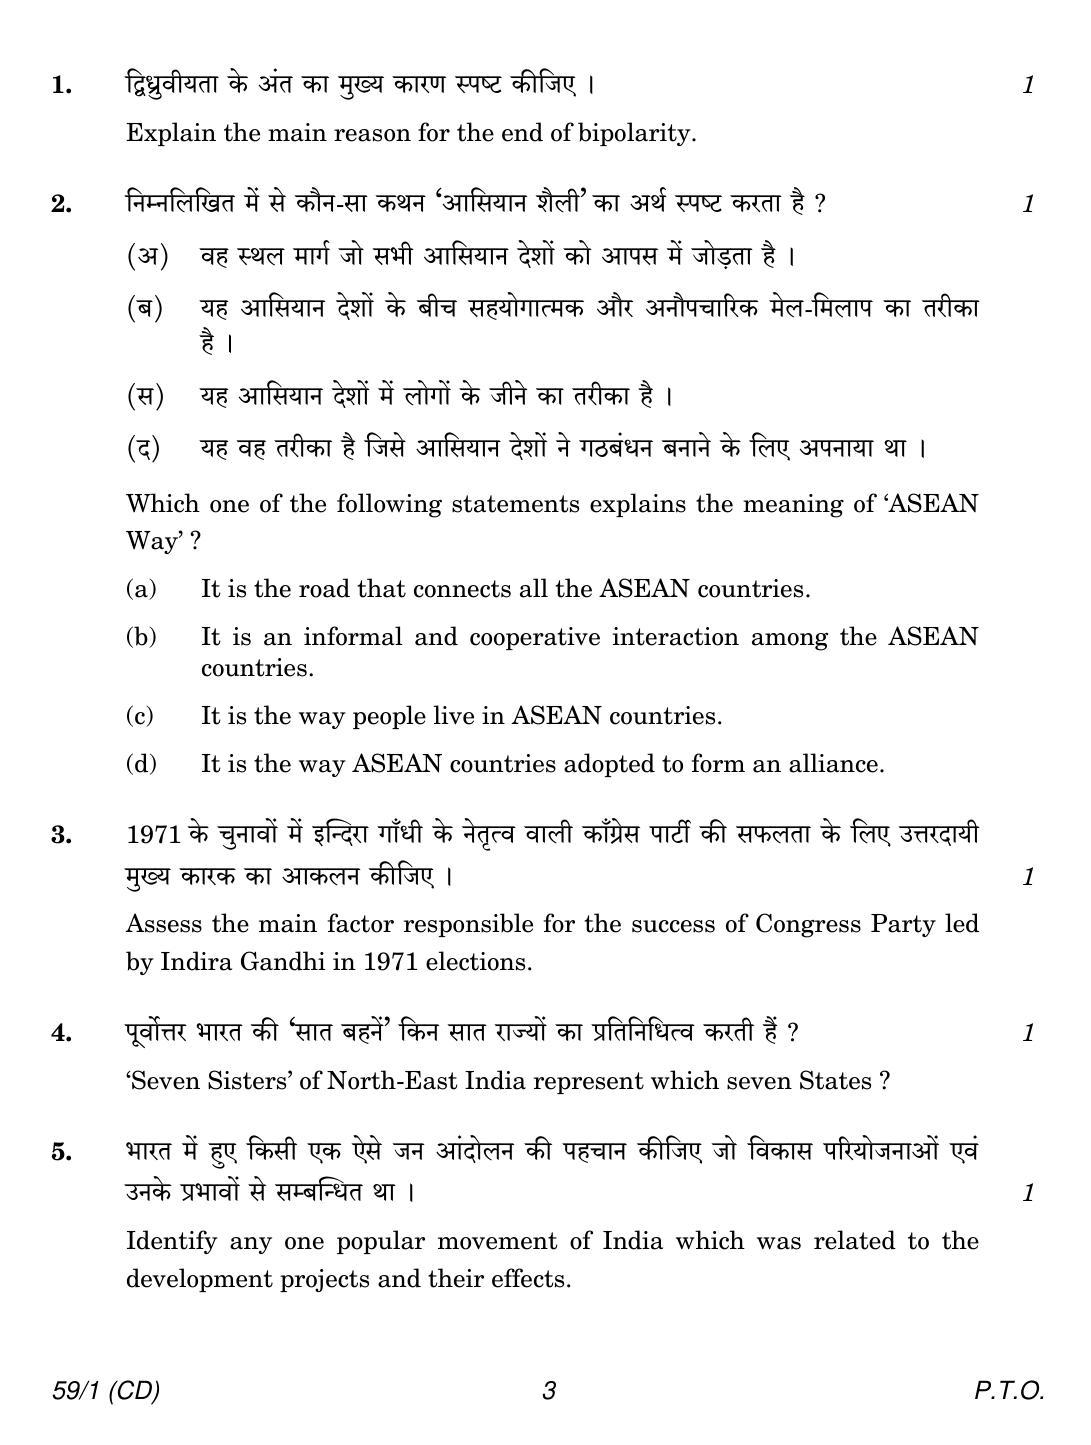 CBSE Class 12 59-1 POLITICAL SCIENCE CD 2018 Question Paper - Page 3